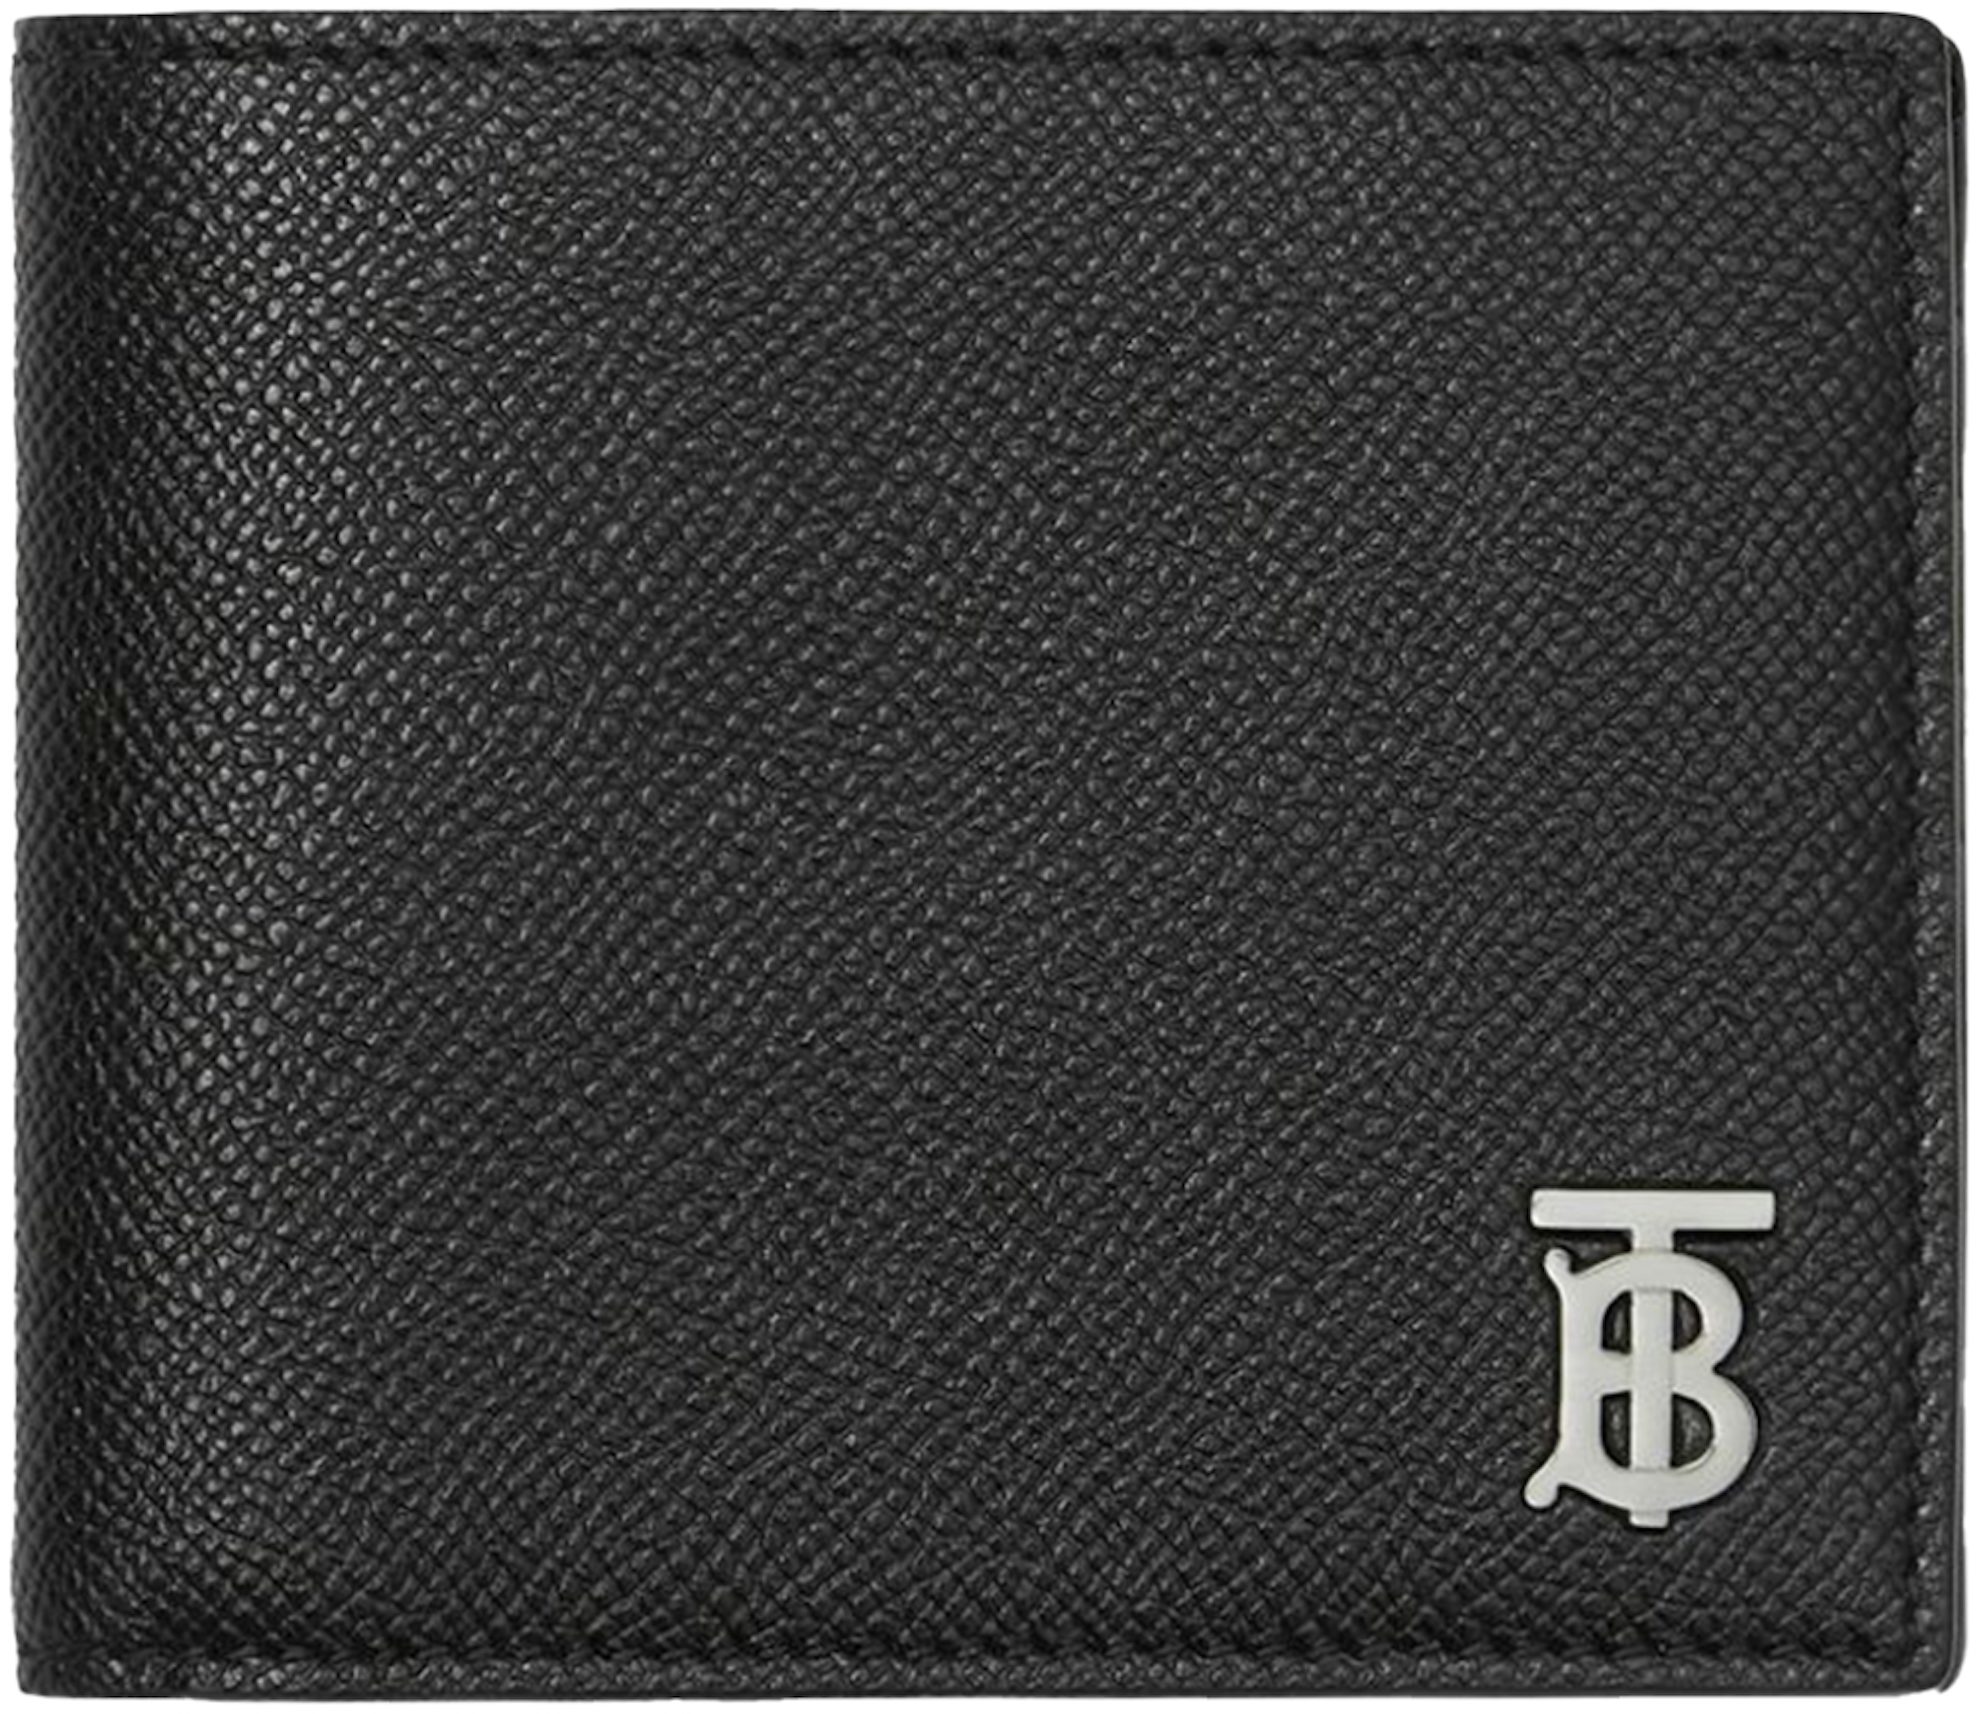 Burberry Black Leather Hastings Bifold Wallet